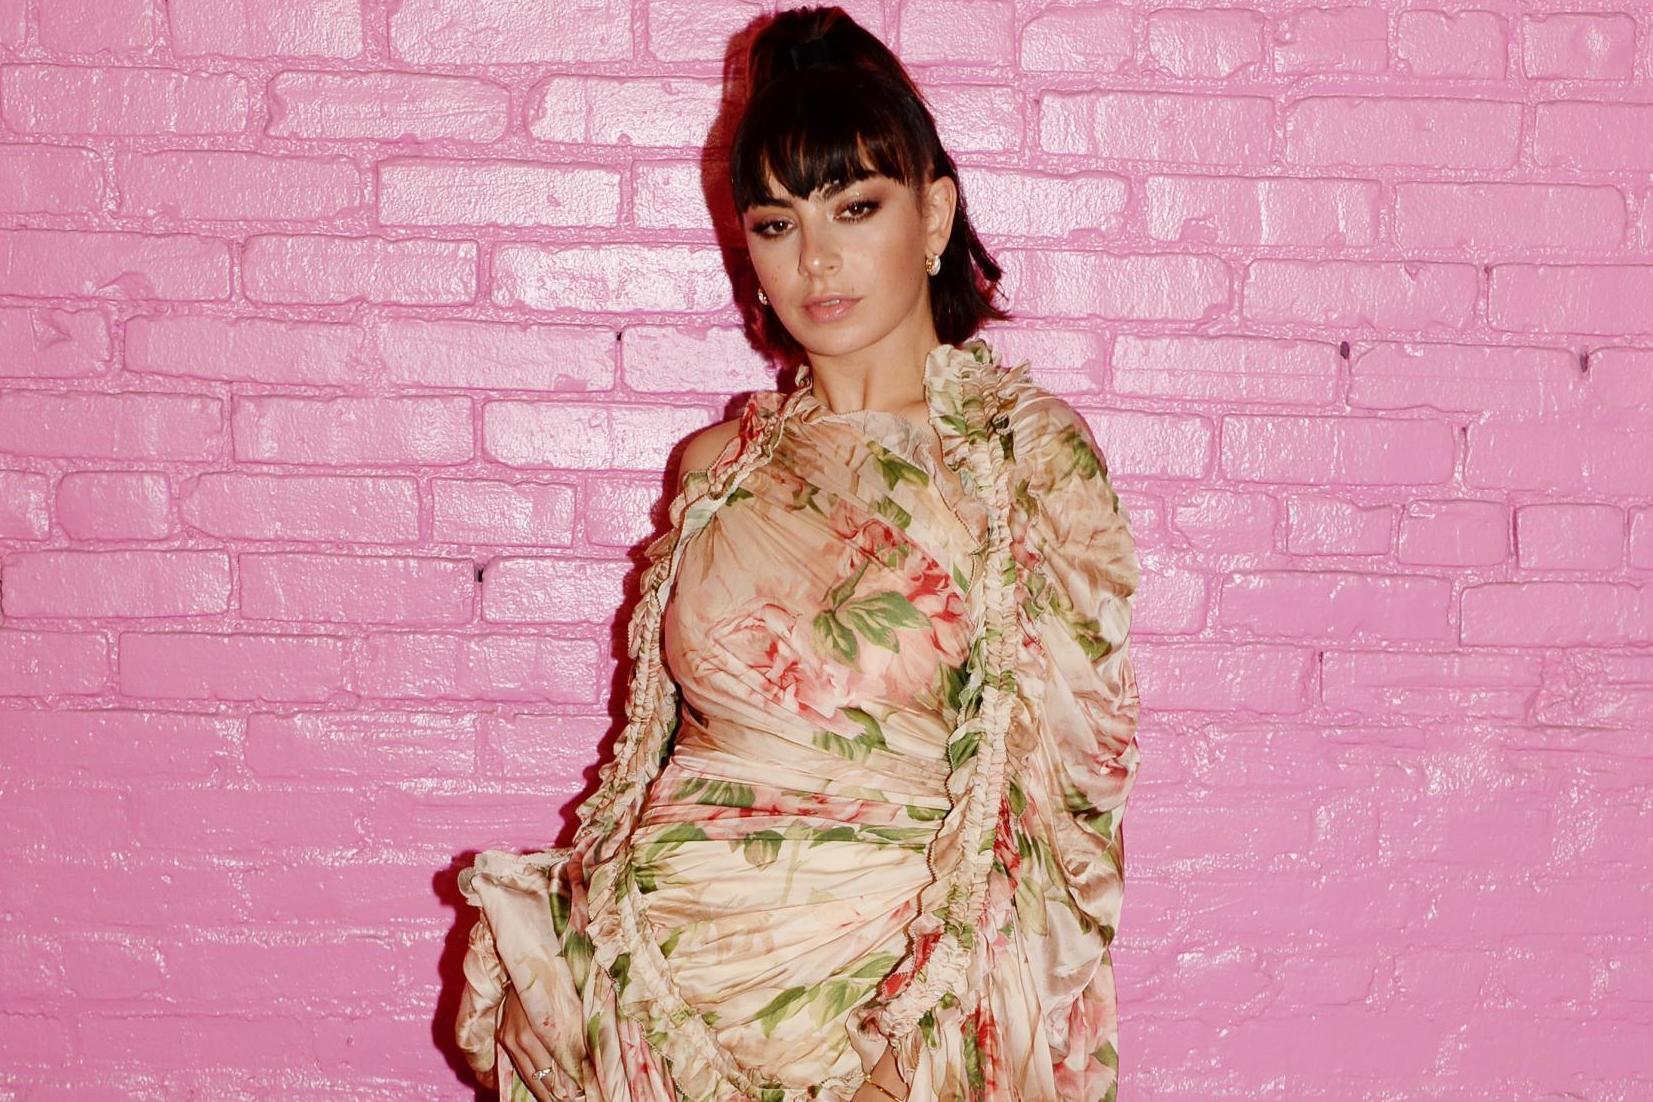 Charli XCX defends fans who asked her to sign dead mum's ashes and a douche